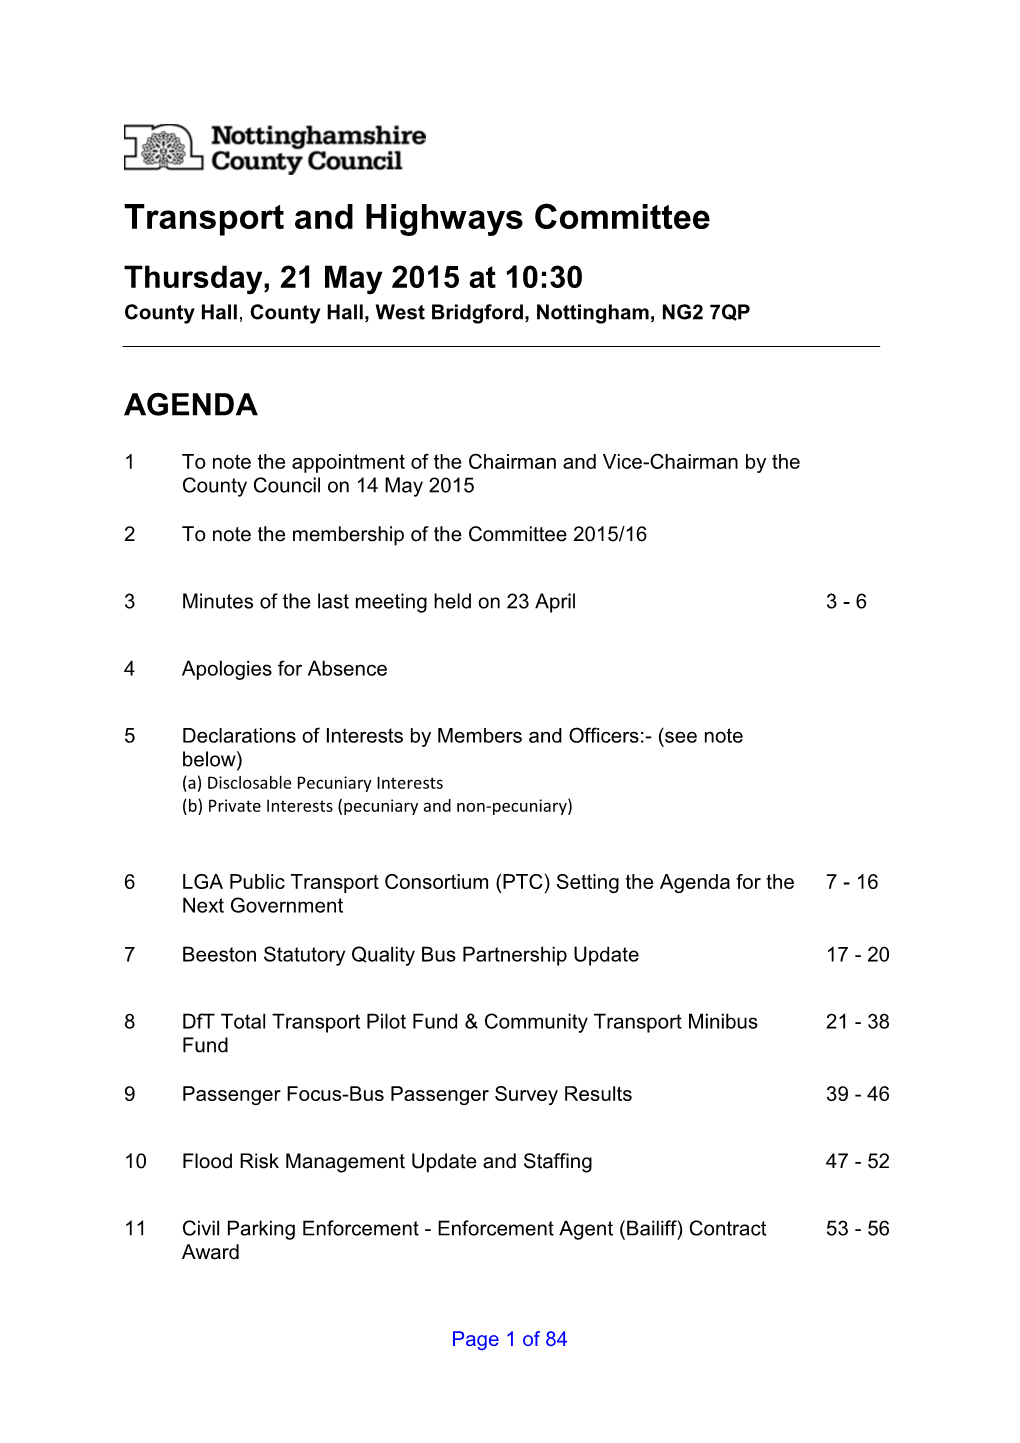 Transport and Highways Committee Thursday, 21 May 2015 at 10:30 County Hall , County Hall, West Bridgford, Nottingham, NG2 7QP